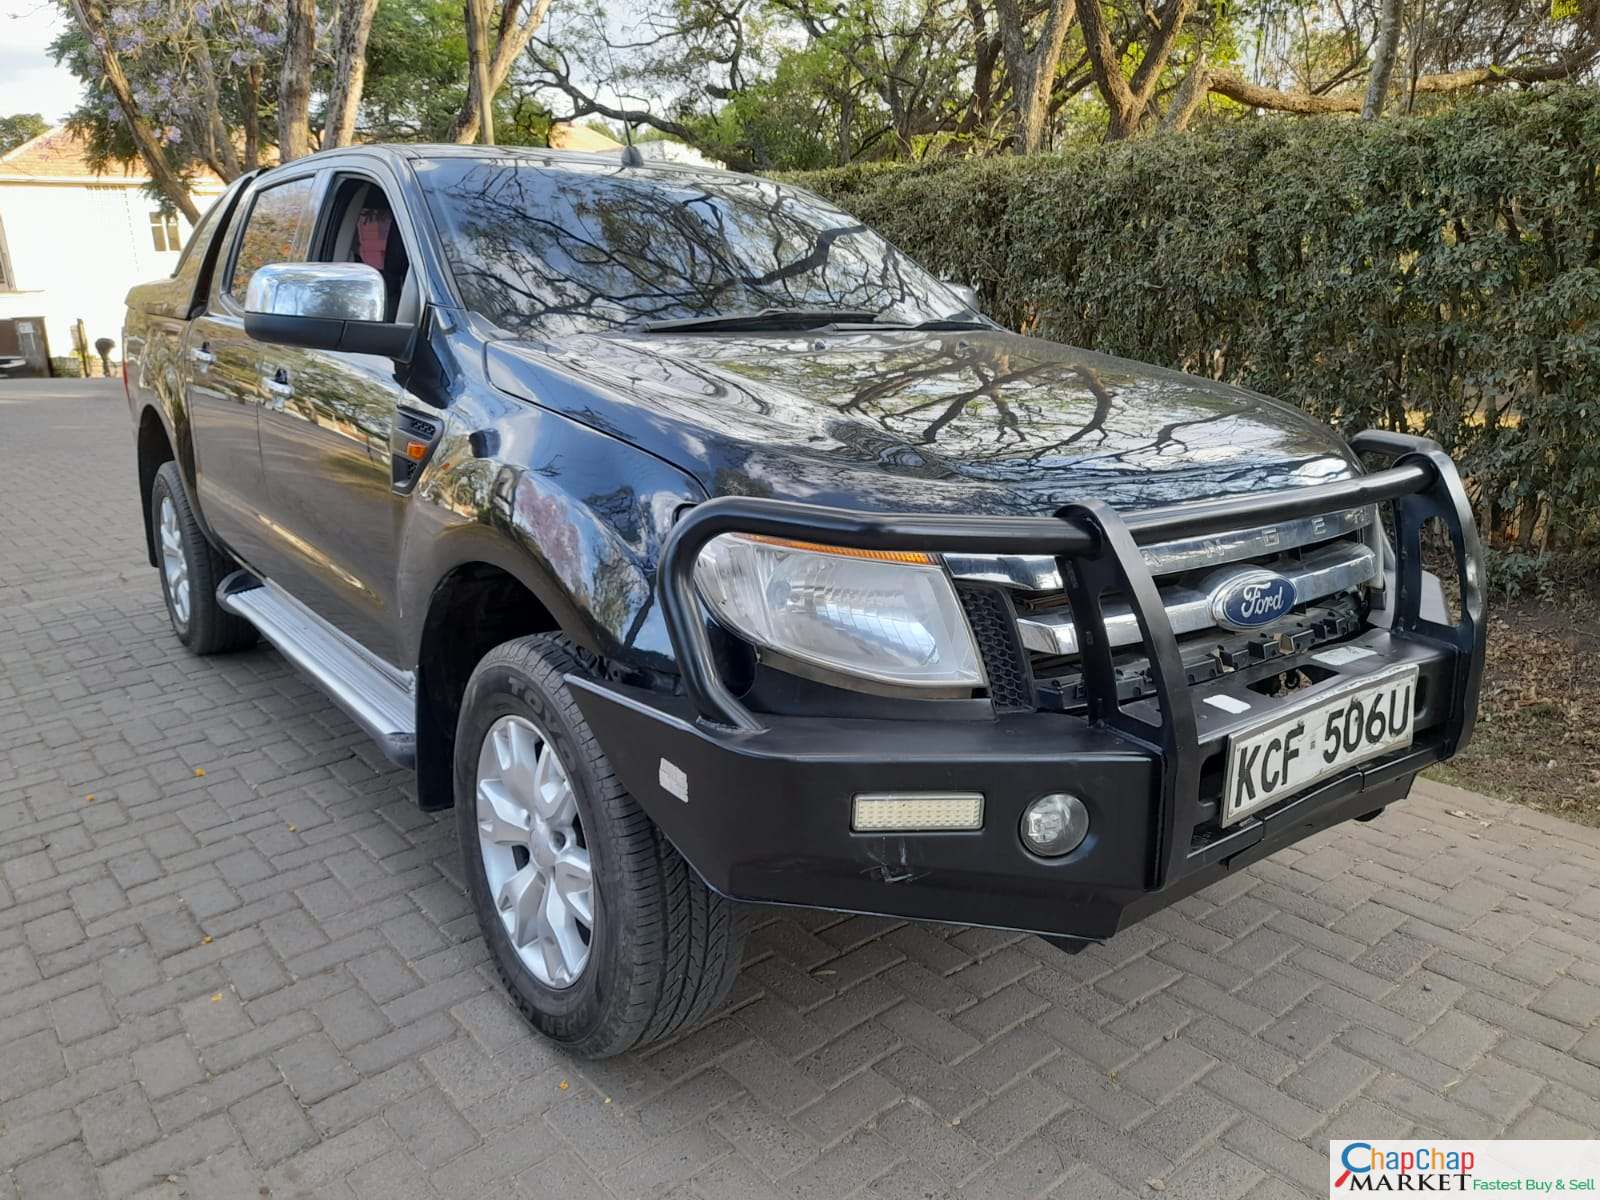 Ford Ranger 2015 QUICK SALE You Pay 30% DEPOSIT INSTALLMENTS TRADE IN OK EXCLUSIVE